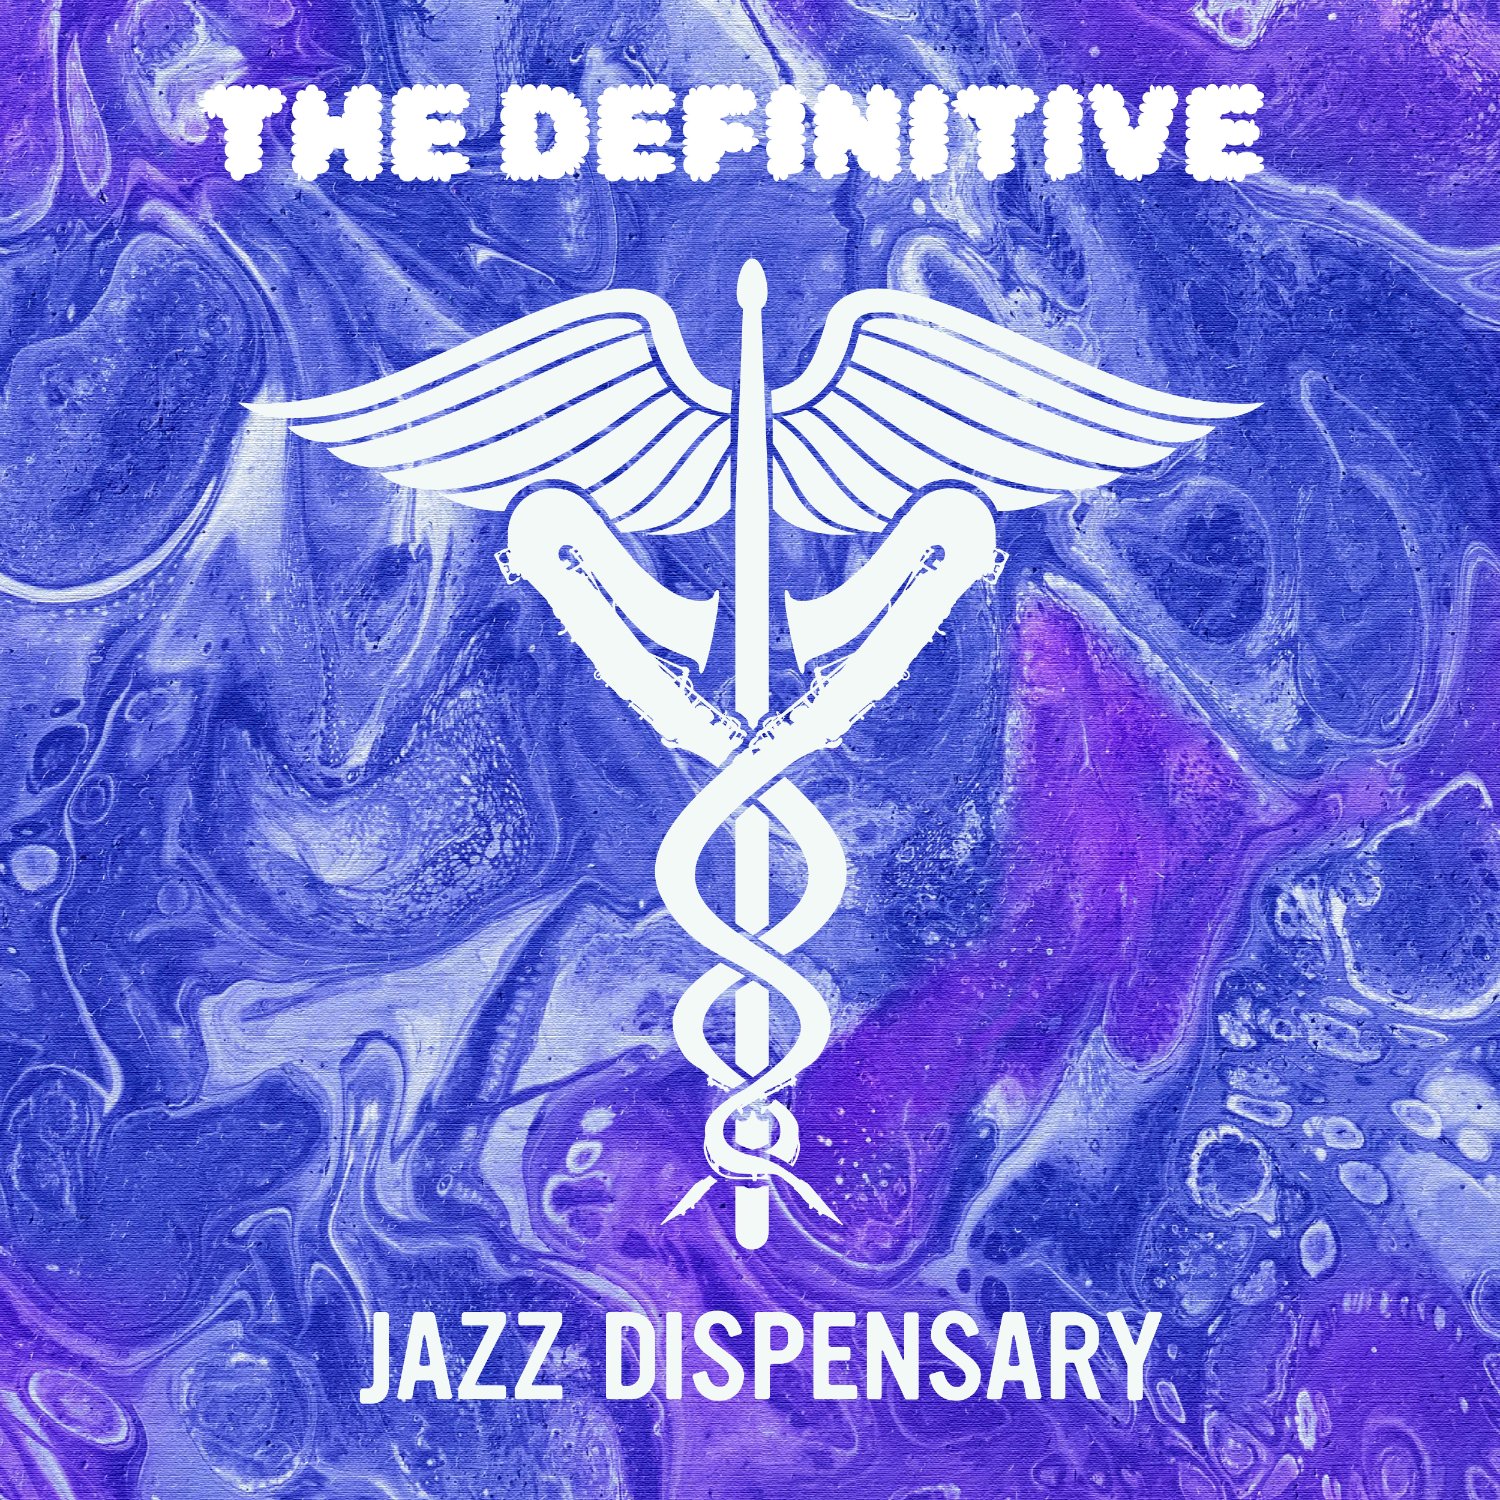 Featured Image for “The Definitive Jazz Dispensary”